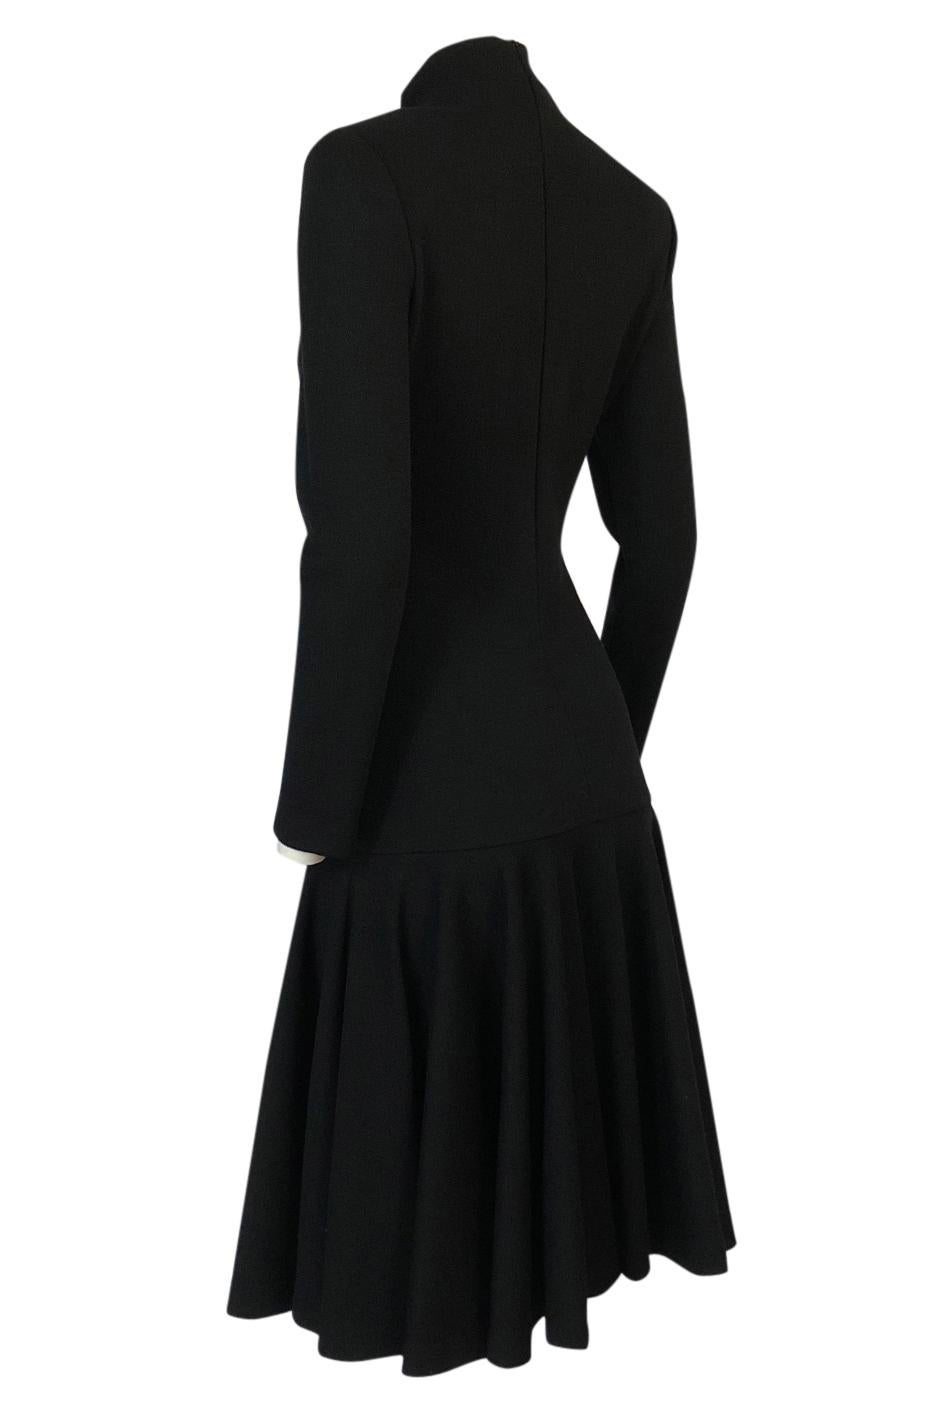 Fall 1988 Patrick Kelly Black Knit Fitted & Flared Skirt Dress 1